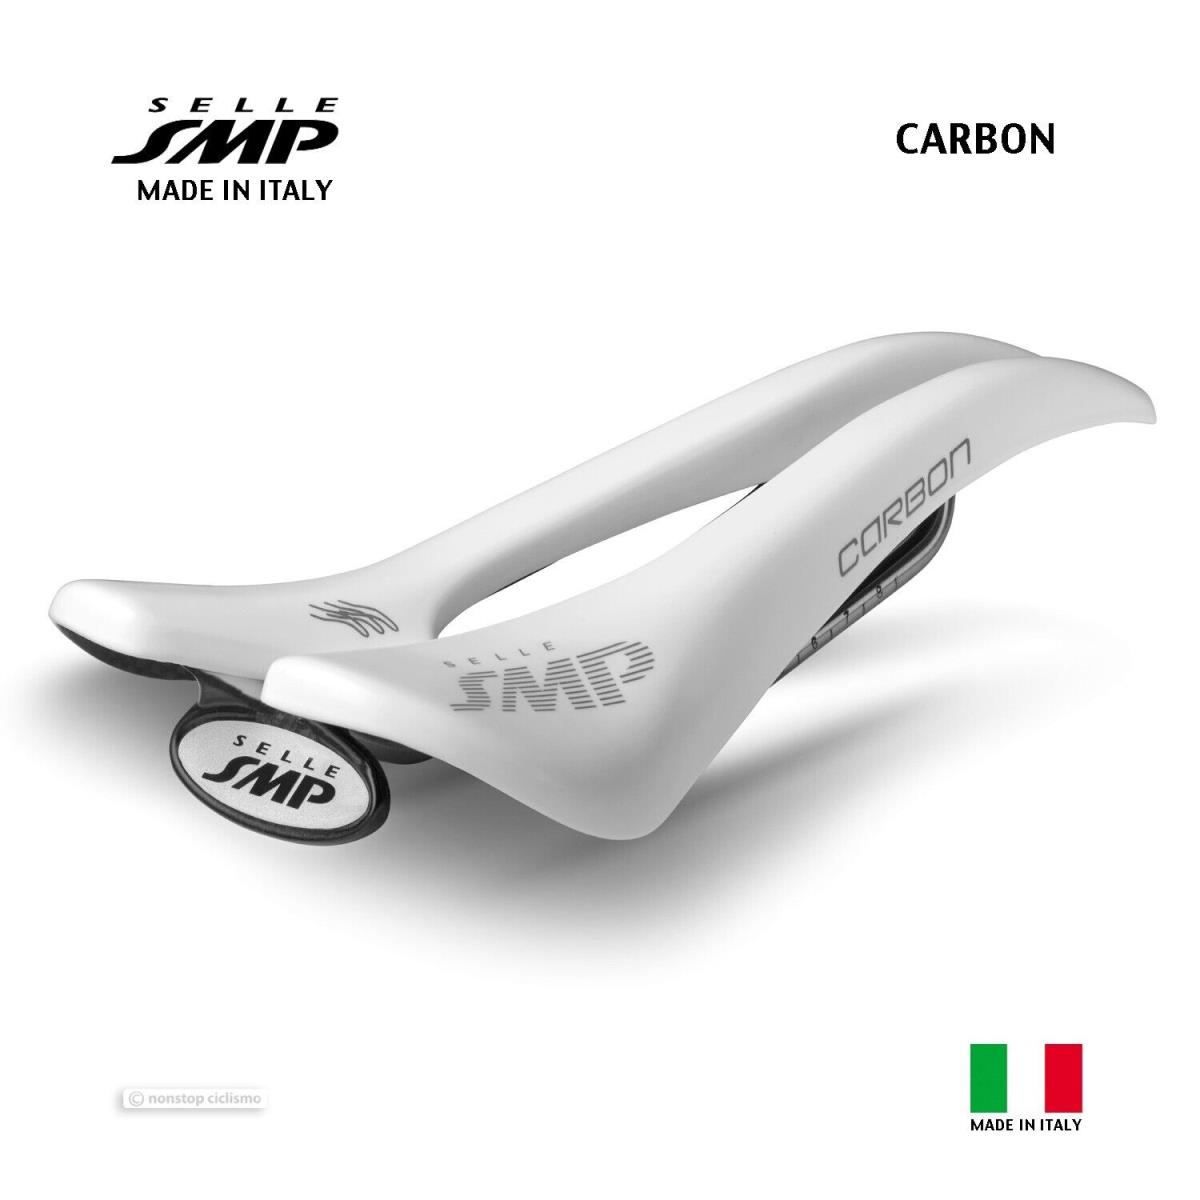 Selle Smp Carbon Saddle : White - Made IN Italy